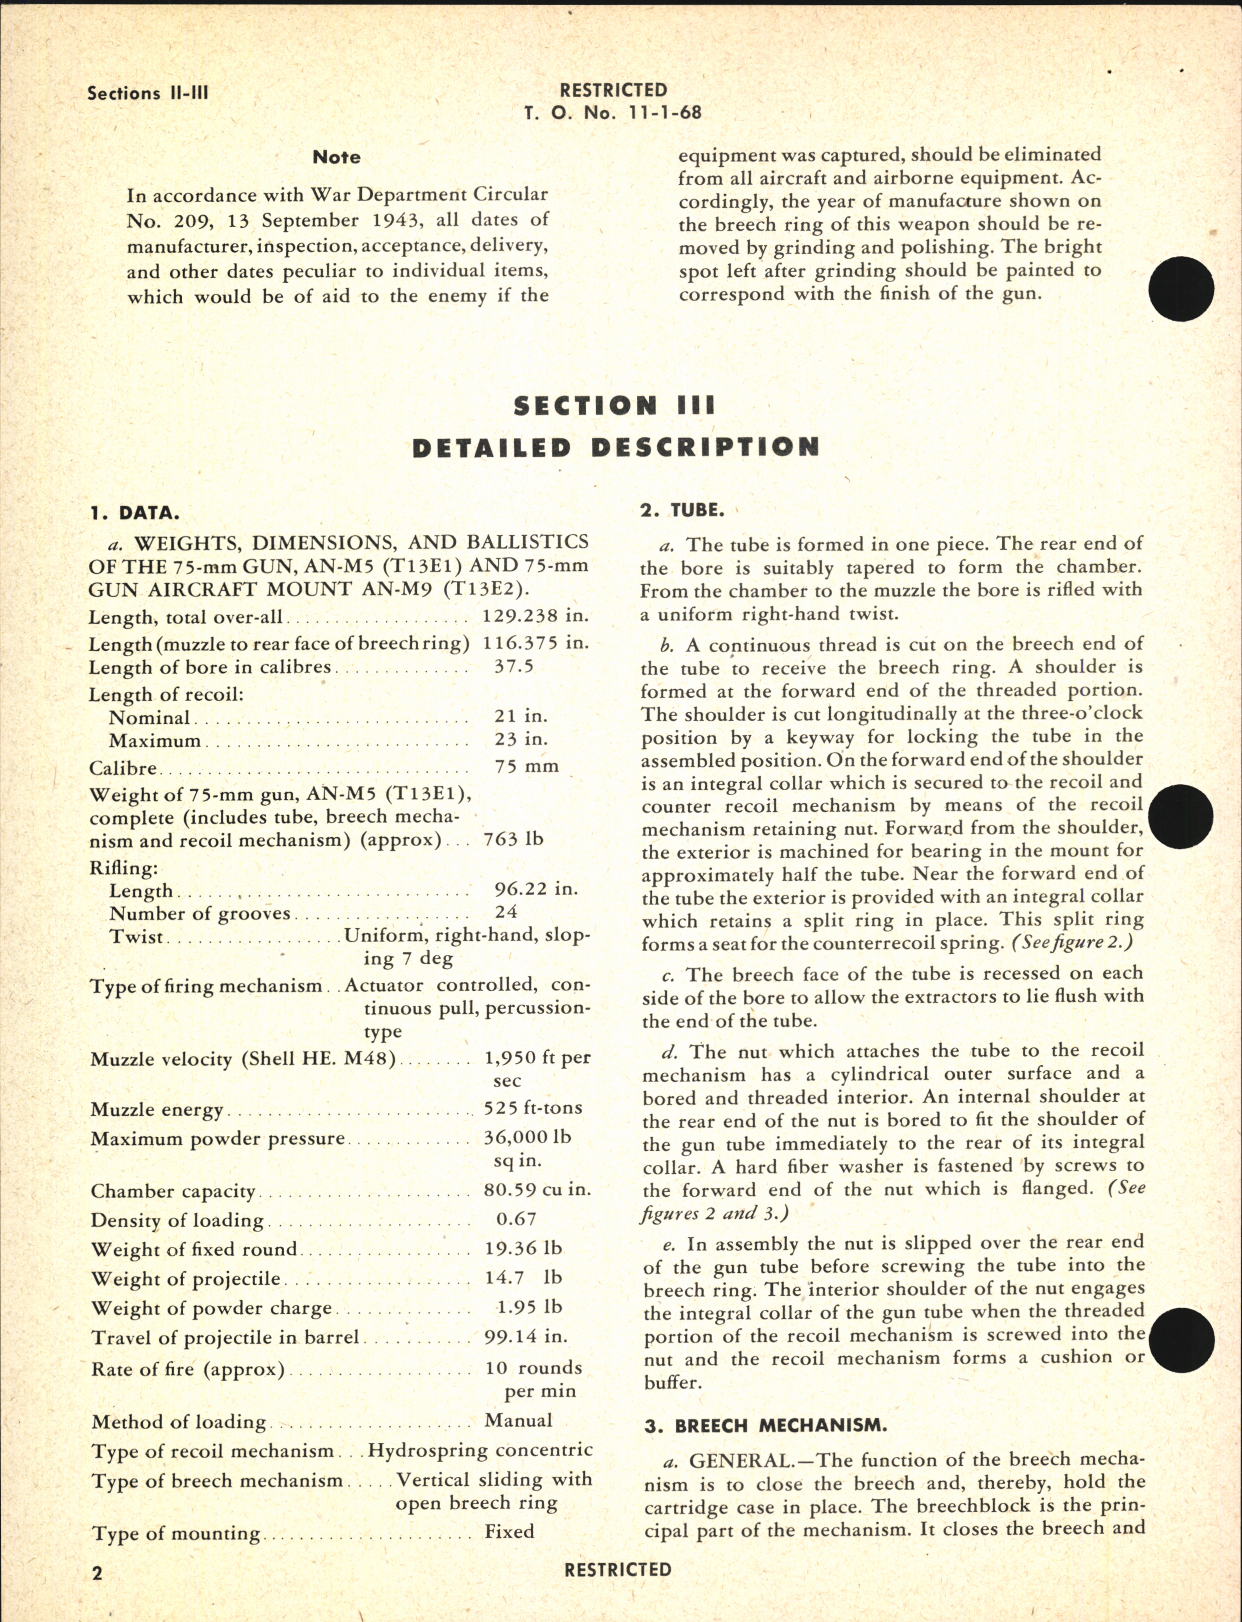 Sample page 6 from AirCorps Library document: Handbook of Instructions with Parts Catalog for 75-MM Aircraft Gun, AN-M5 (T13E1) and AN-M9 (T13E2)